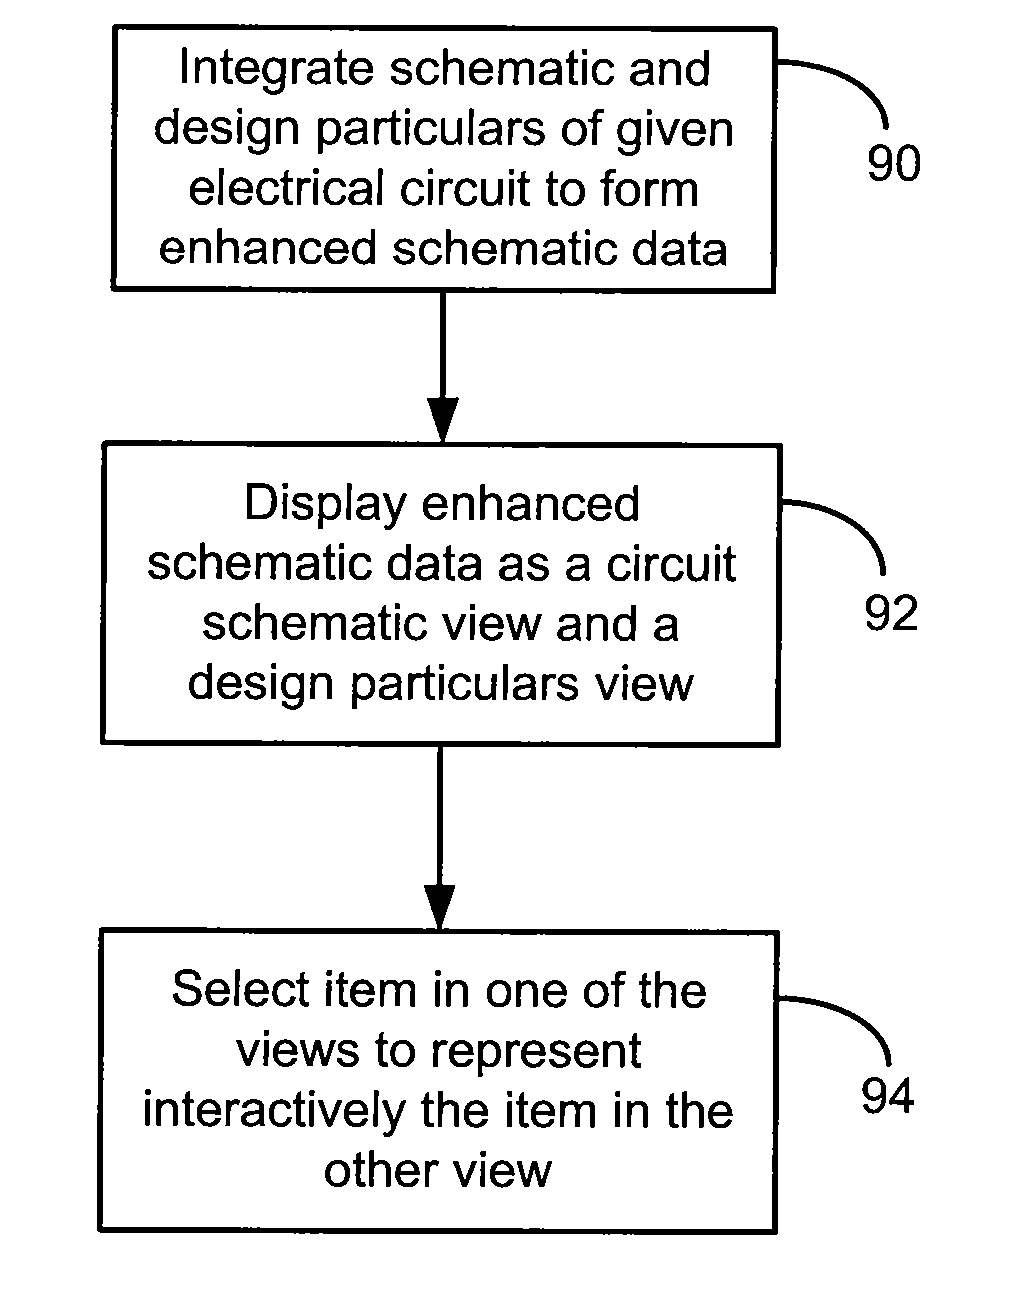 Interactive schematic for use in analog, mixed-signal, and custom digital circuit design